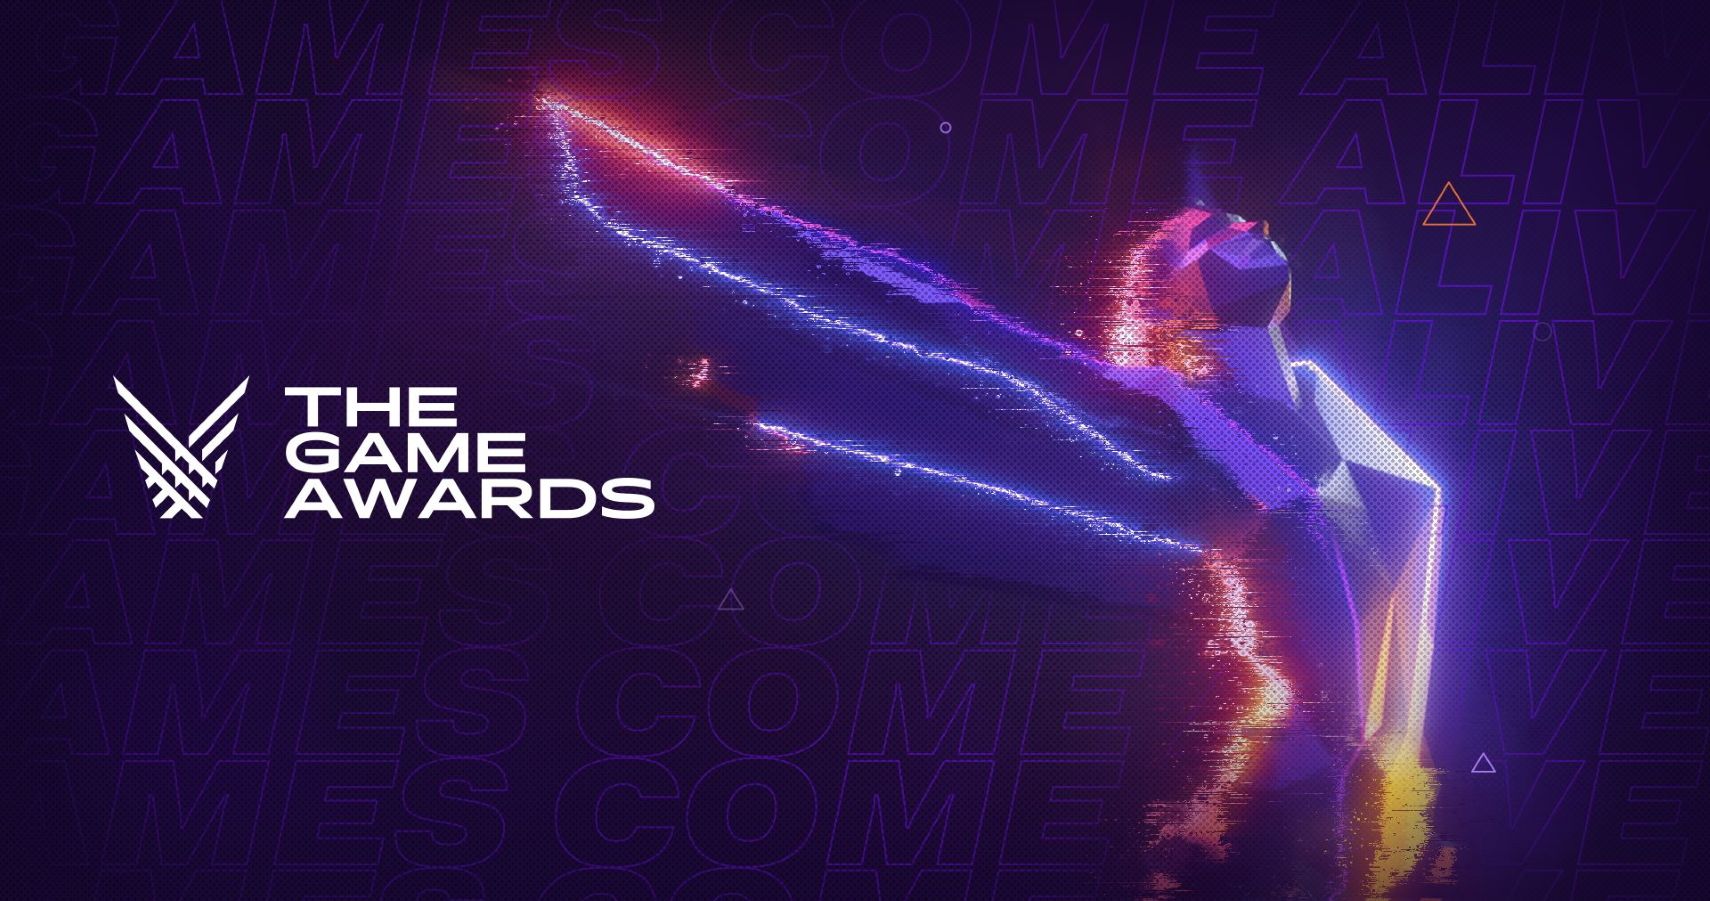 The Game Awards Every Game of The Year, Ranked (According To Metacritic)